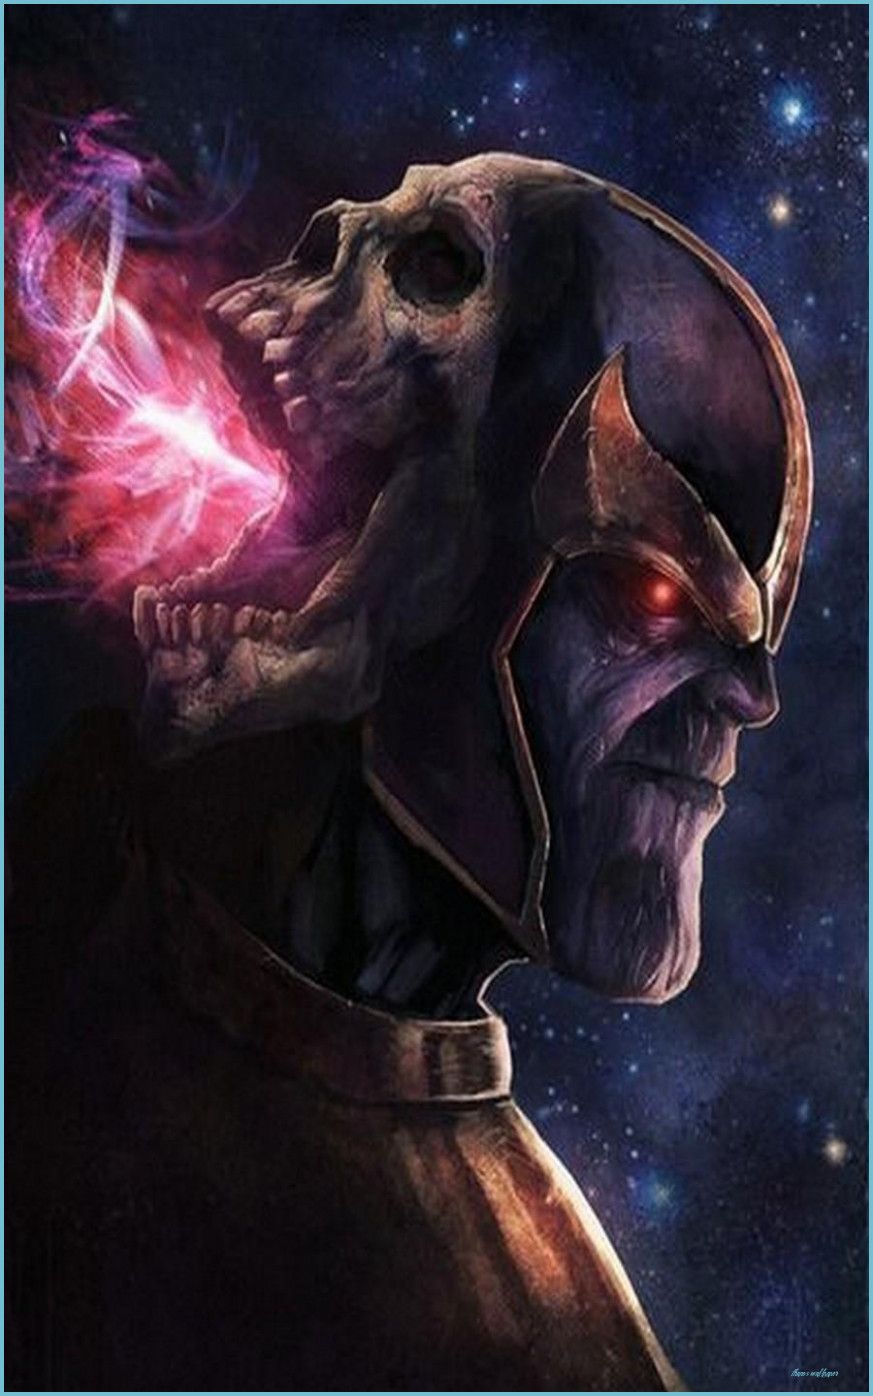 How Will Thanos Wallpaper Be In The .anupghosal.com